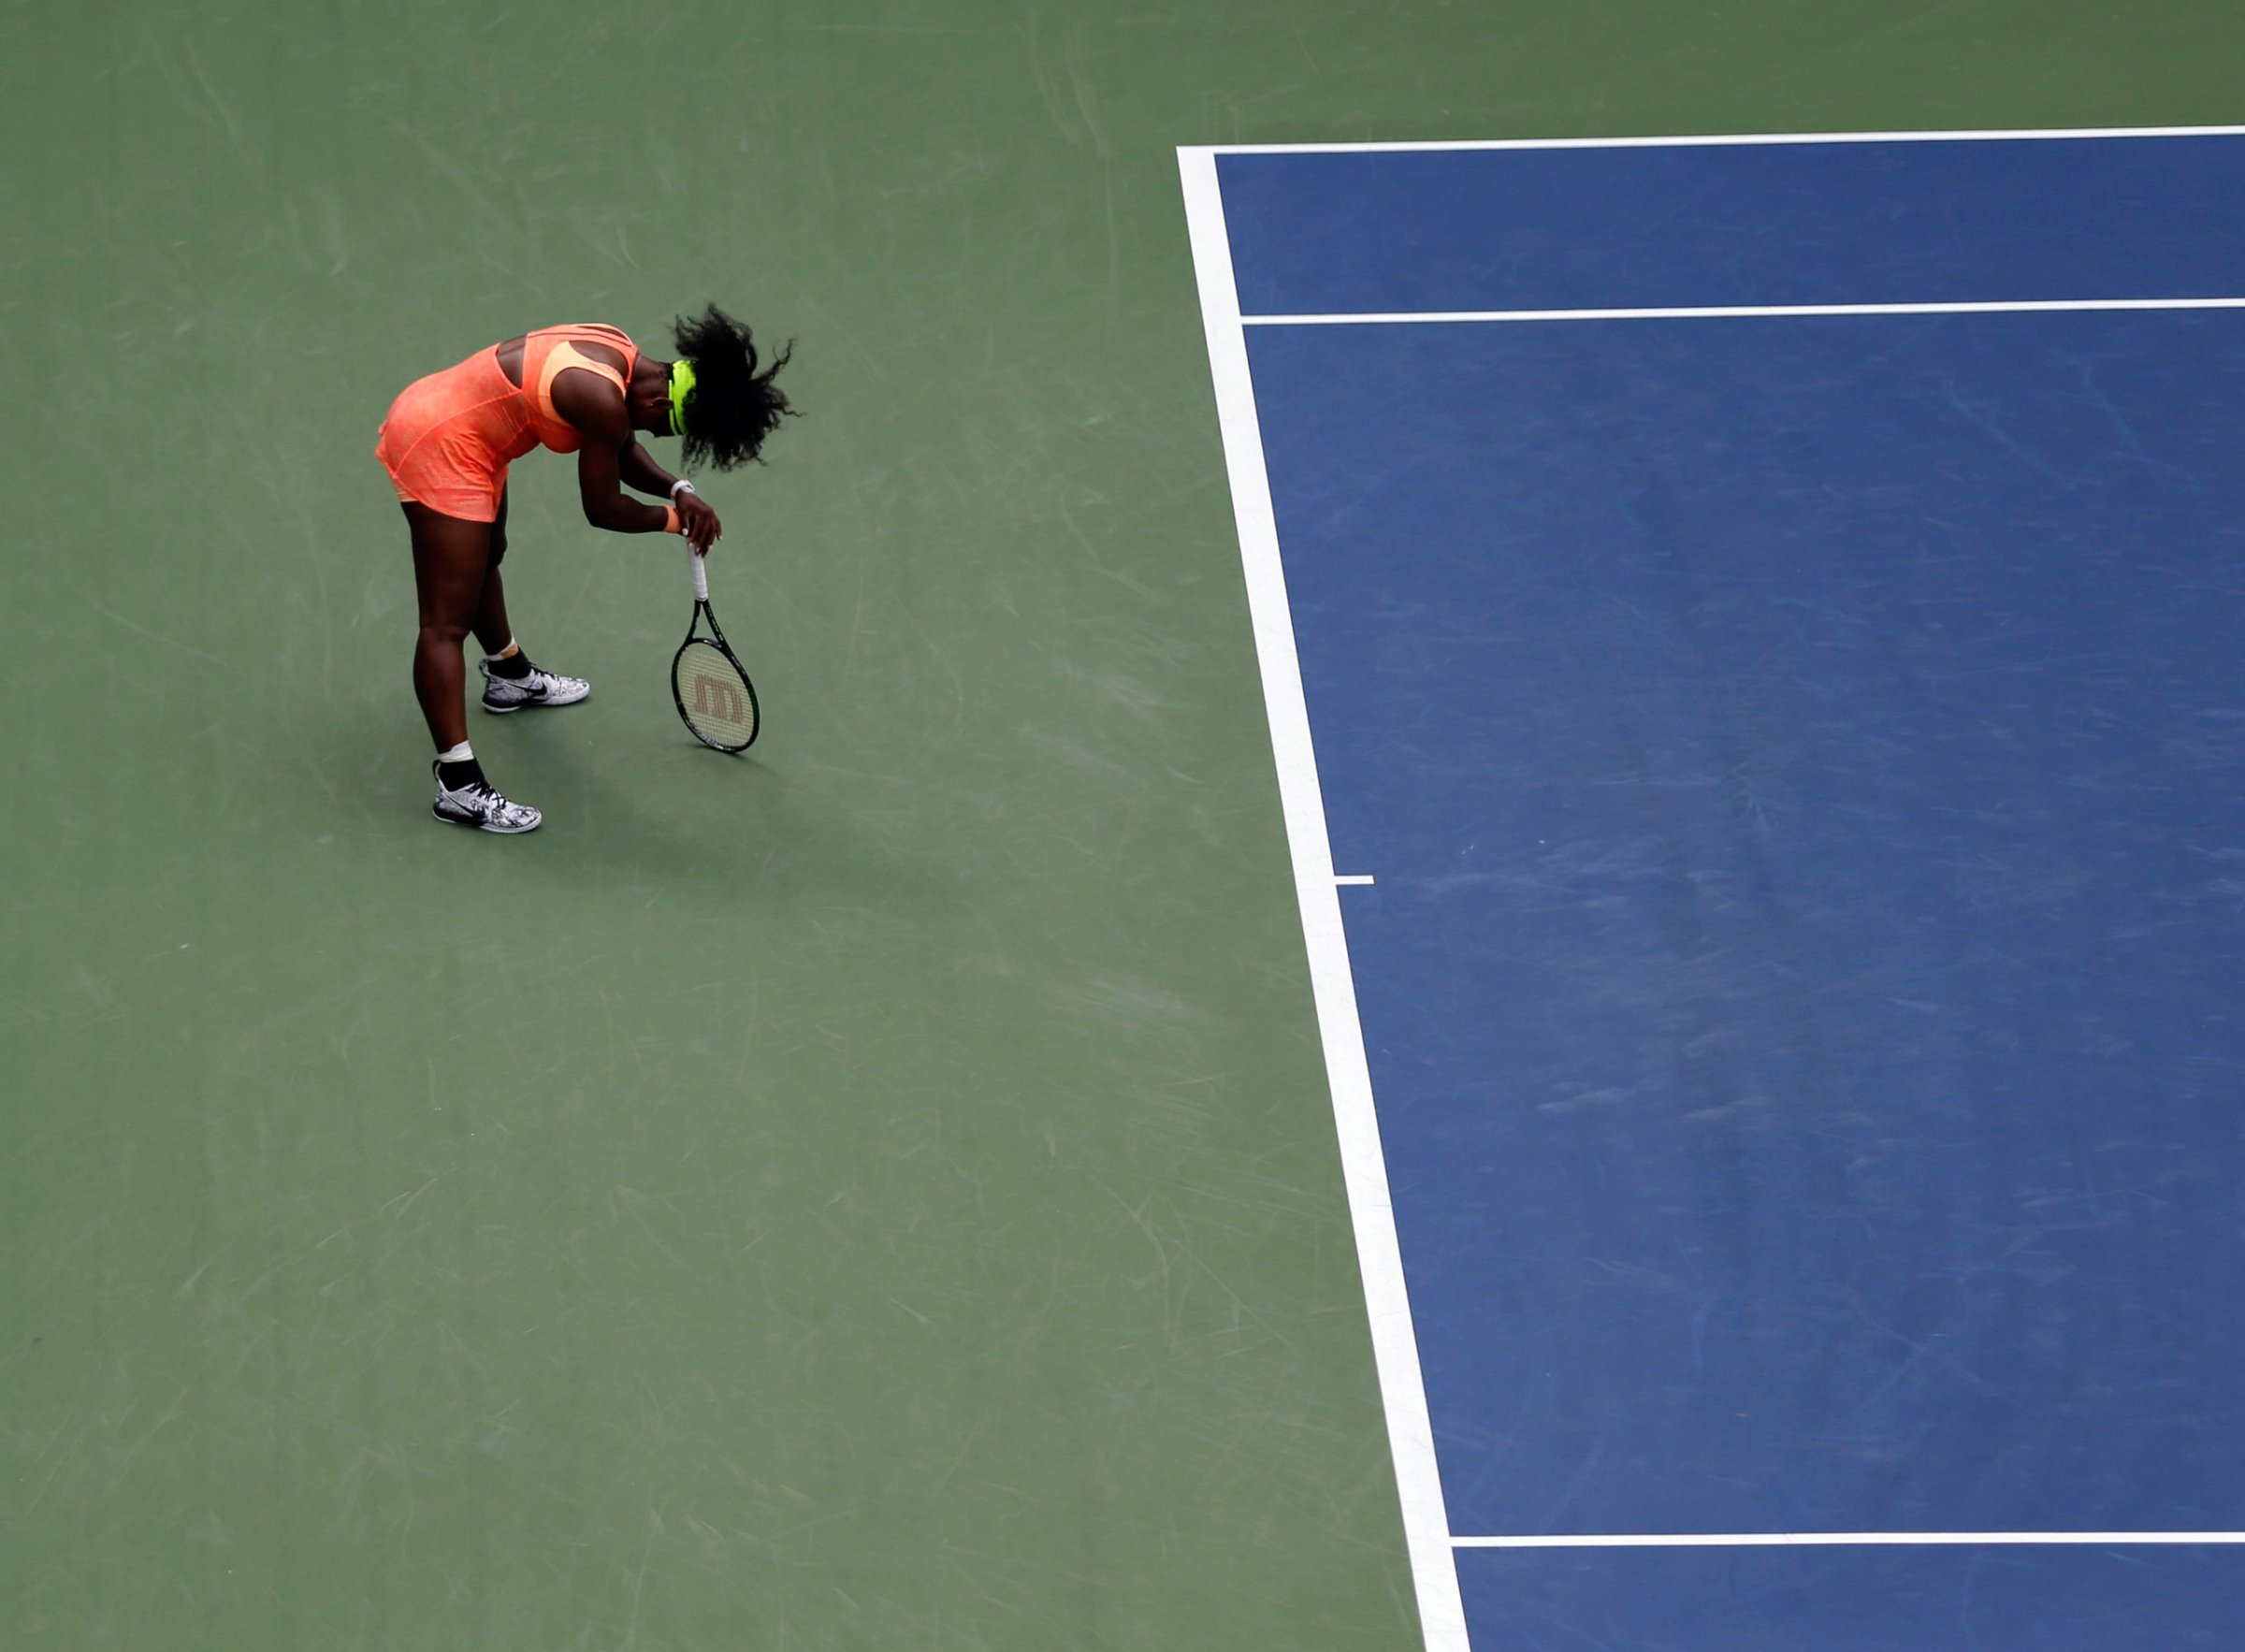 Serena Williams reacts after losing a point to Roberta Vinci, of Italy, during a semifinal match at the U.S. Open tennis tournament, Friday, Sept. 11, 2015, in New York. (AP Photo/Seth Wenig)